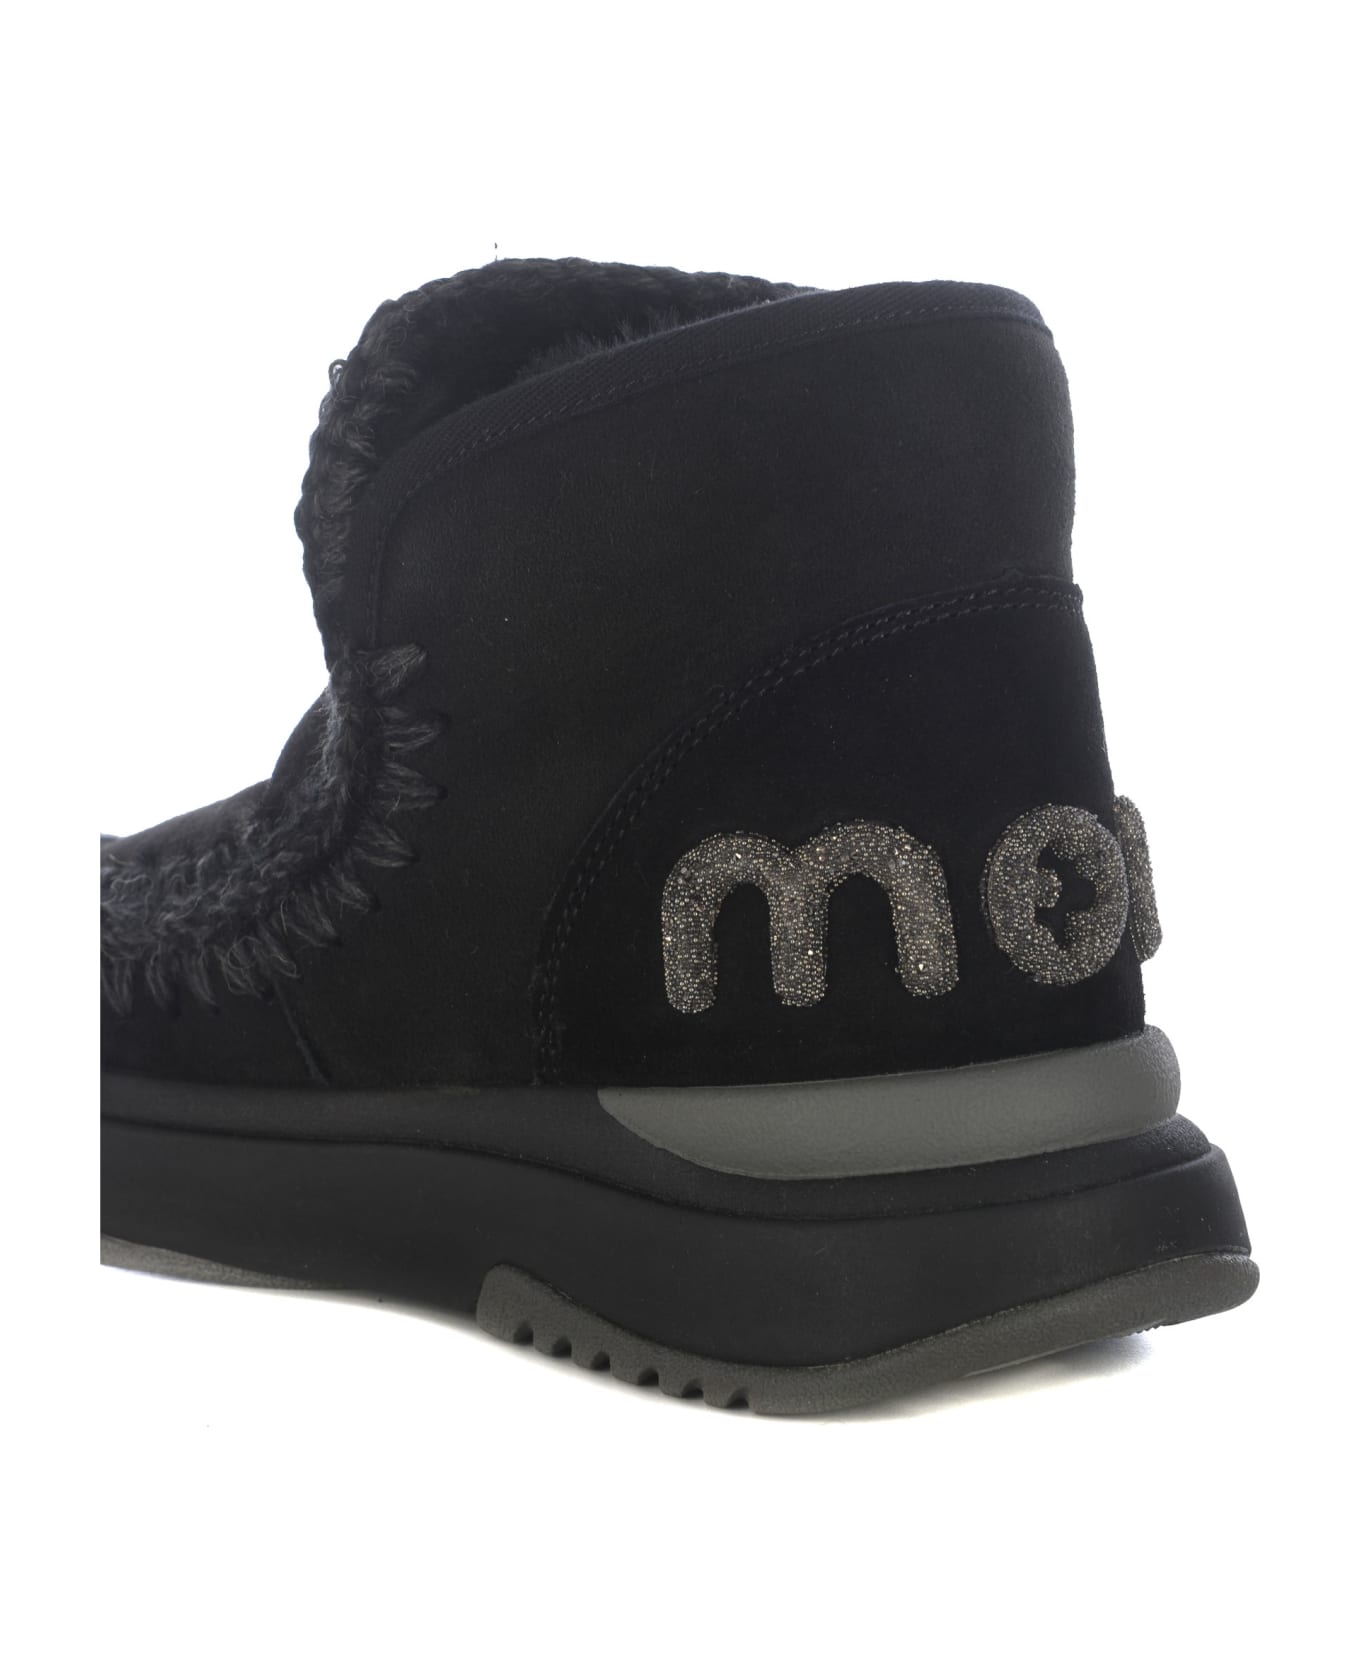 Mou Anckle Boots Mou "eskimo Jogger" Made Of Leather - Nero スニーカー